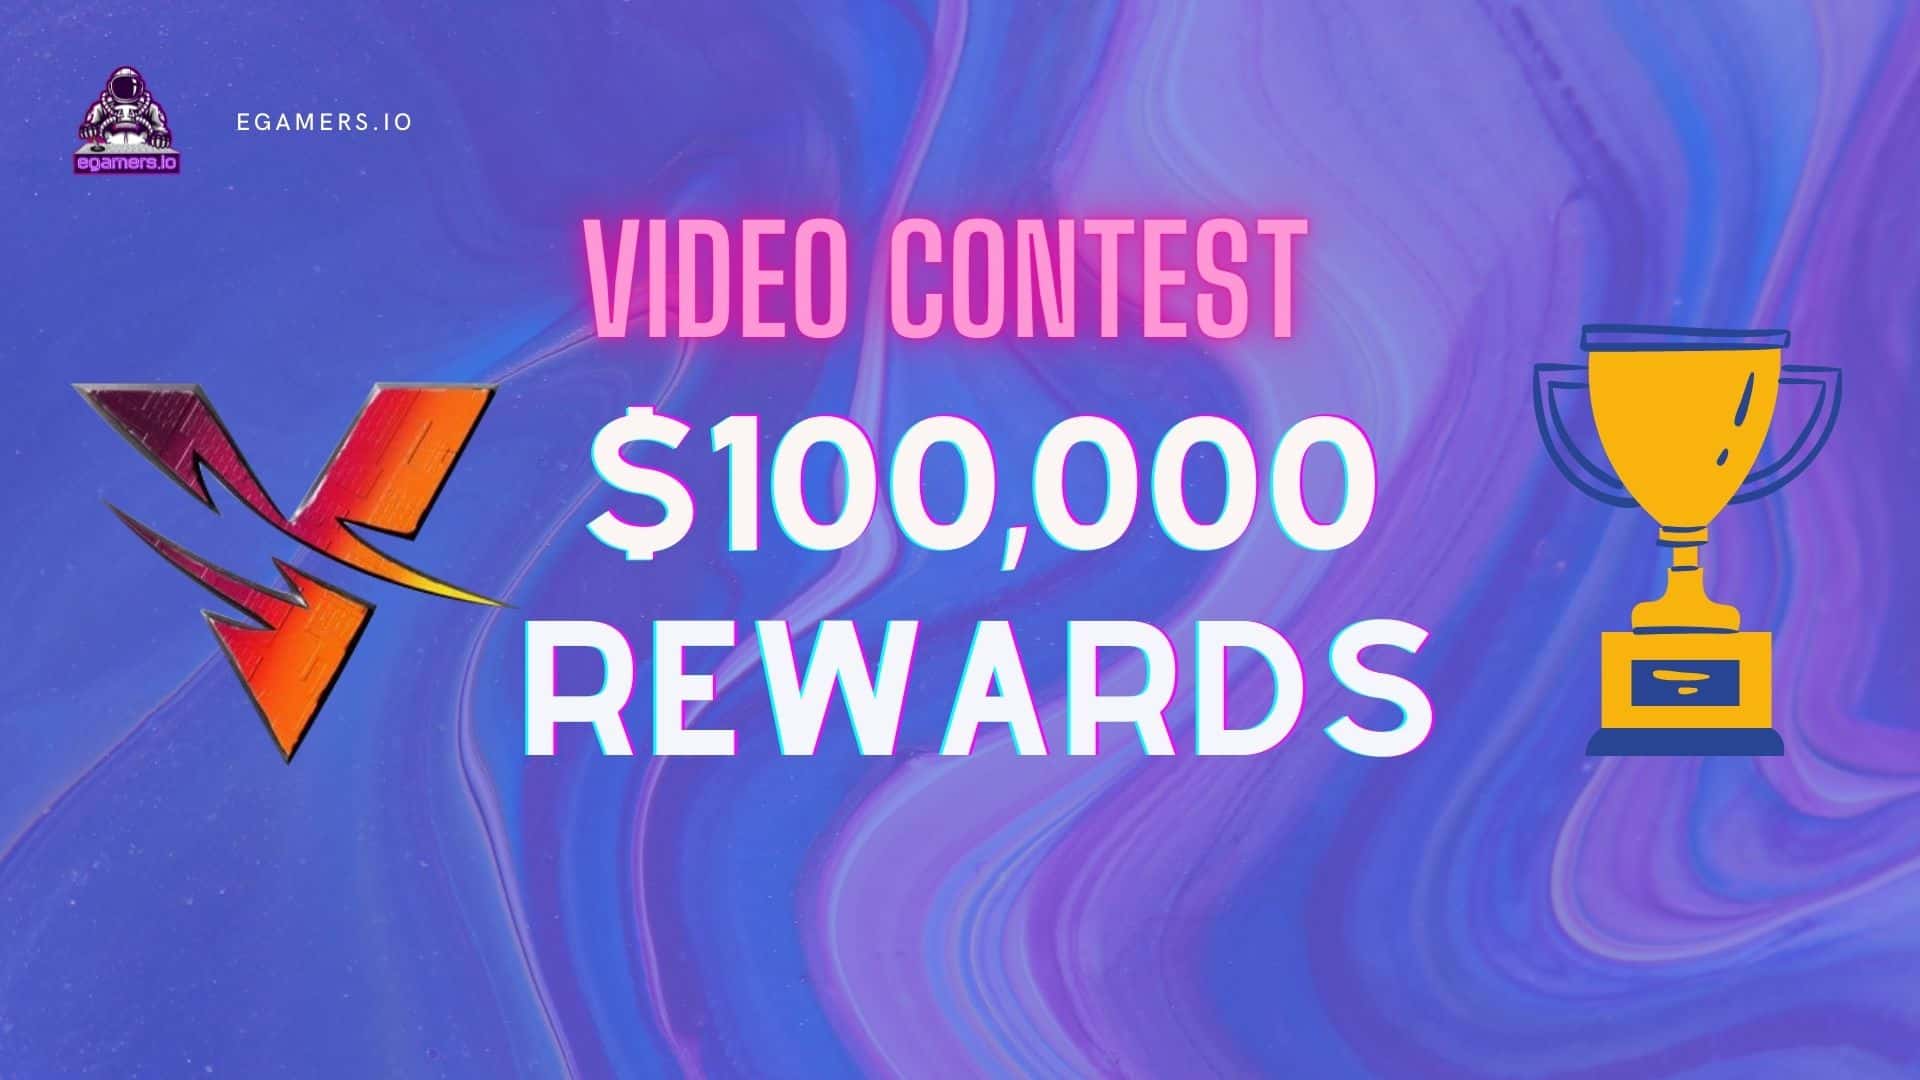 Vulcan Forged video contest Vulcan Forged is hosting a video competition with 100,000$ in PYR tokens to be shared among the participants! This contest comes with double benefits as video creators will get noticed since Vulcan Forged is an evergrowing ecosystem of play-to-earn games and metaverses with rapidly increasing exposure.